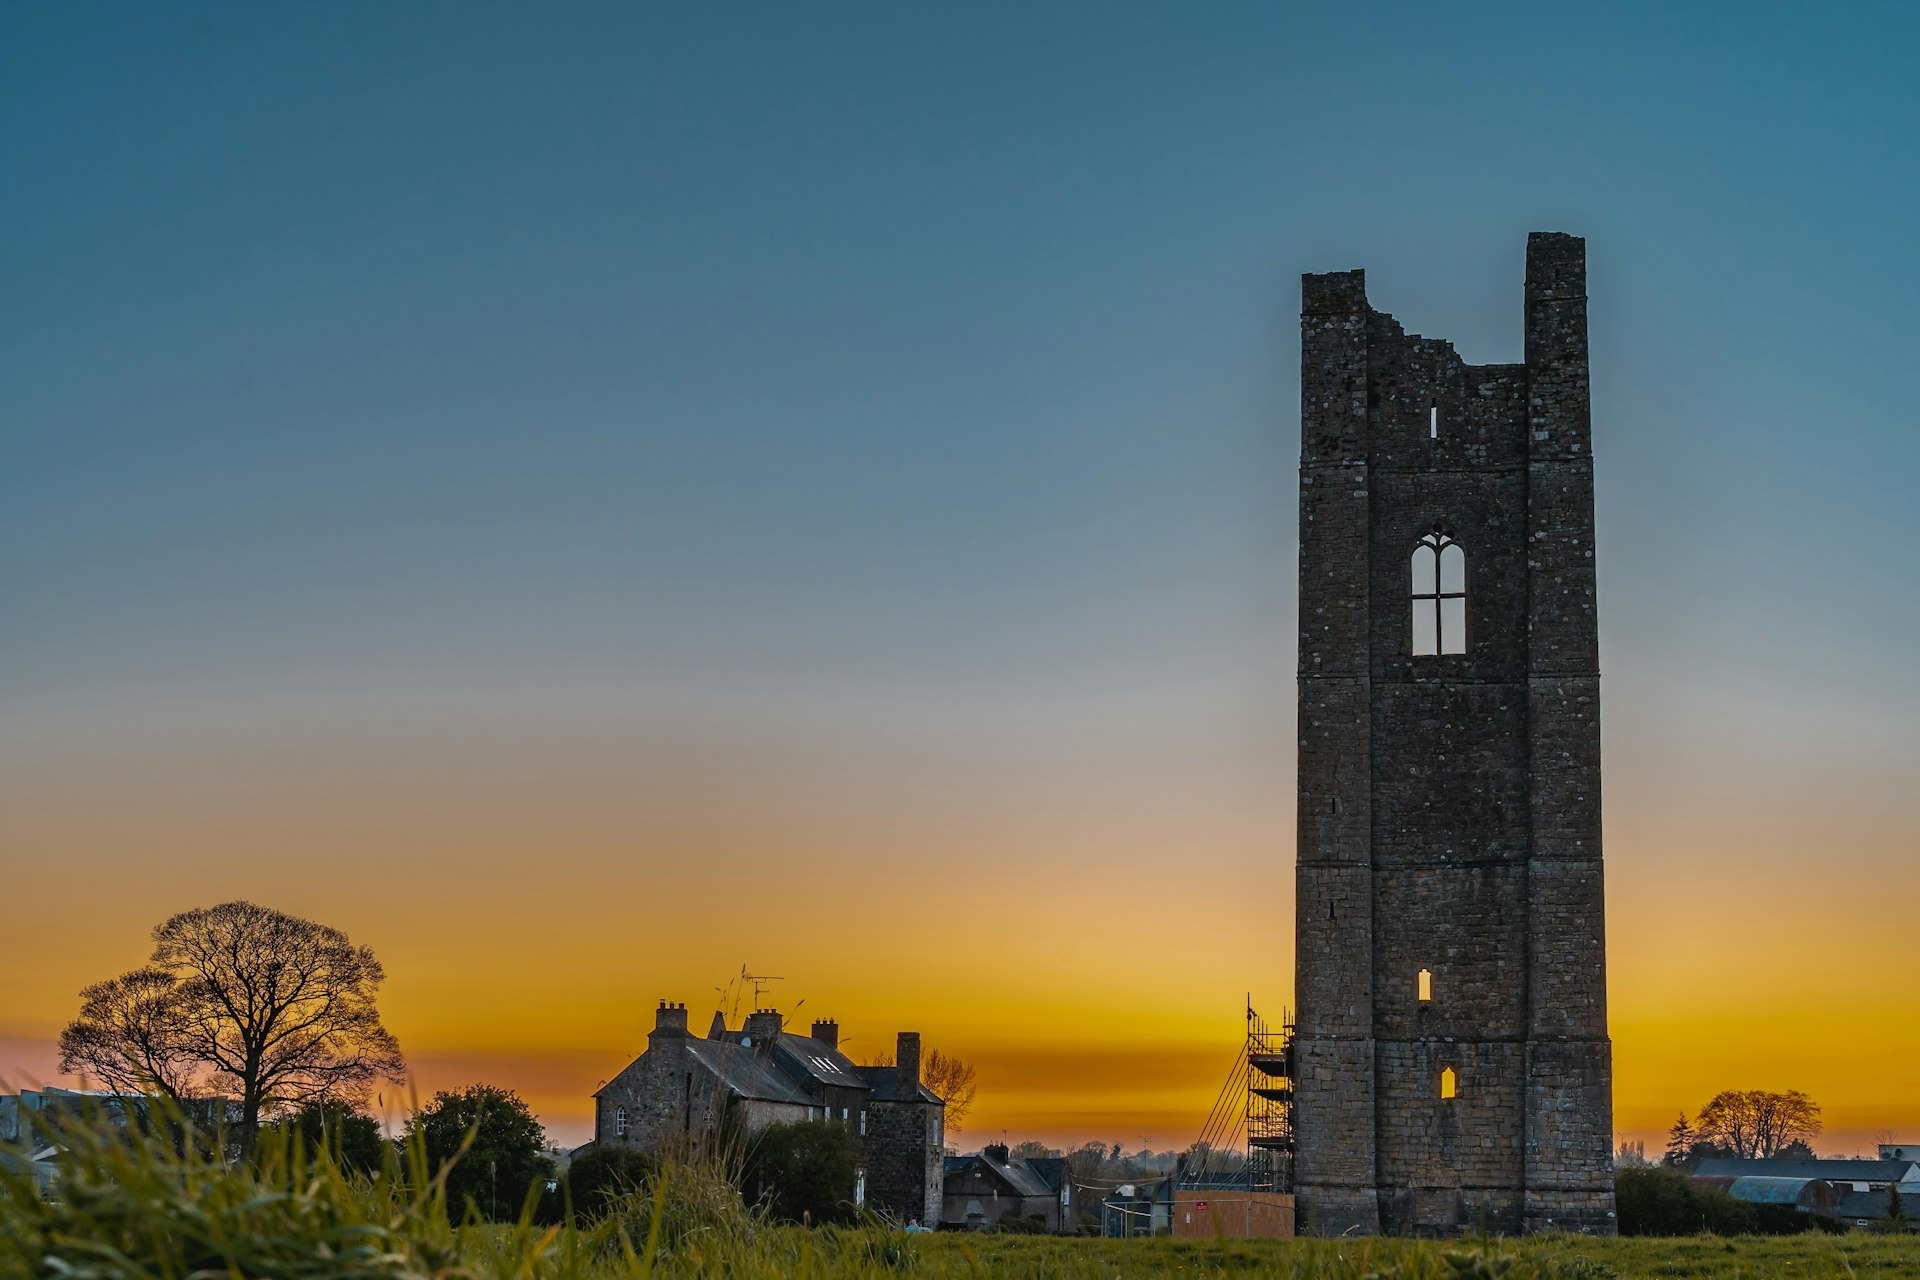 The sun sets behind a tall ruined stone Gothic tower in a rural area